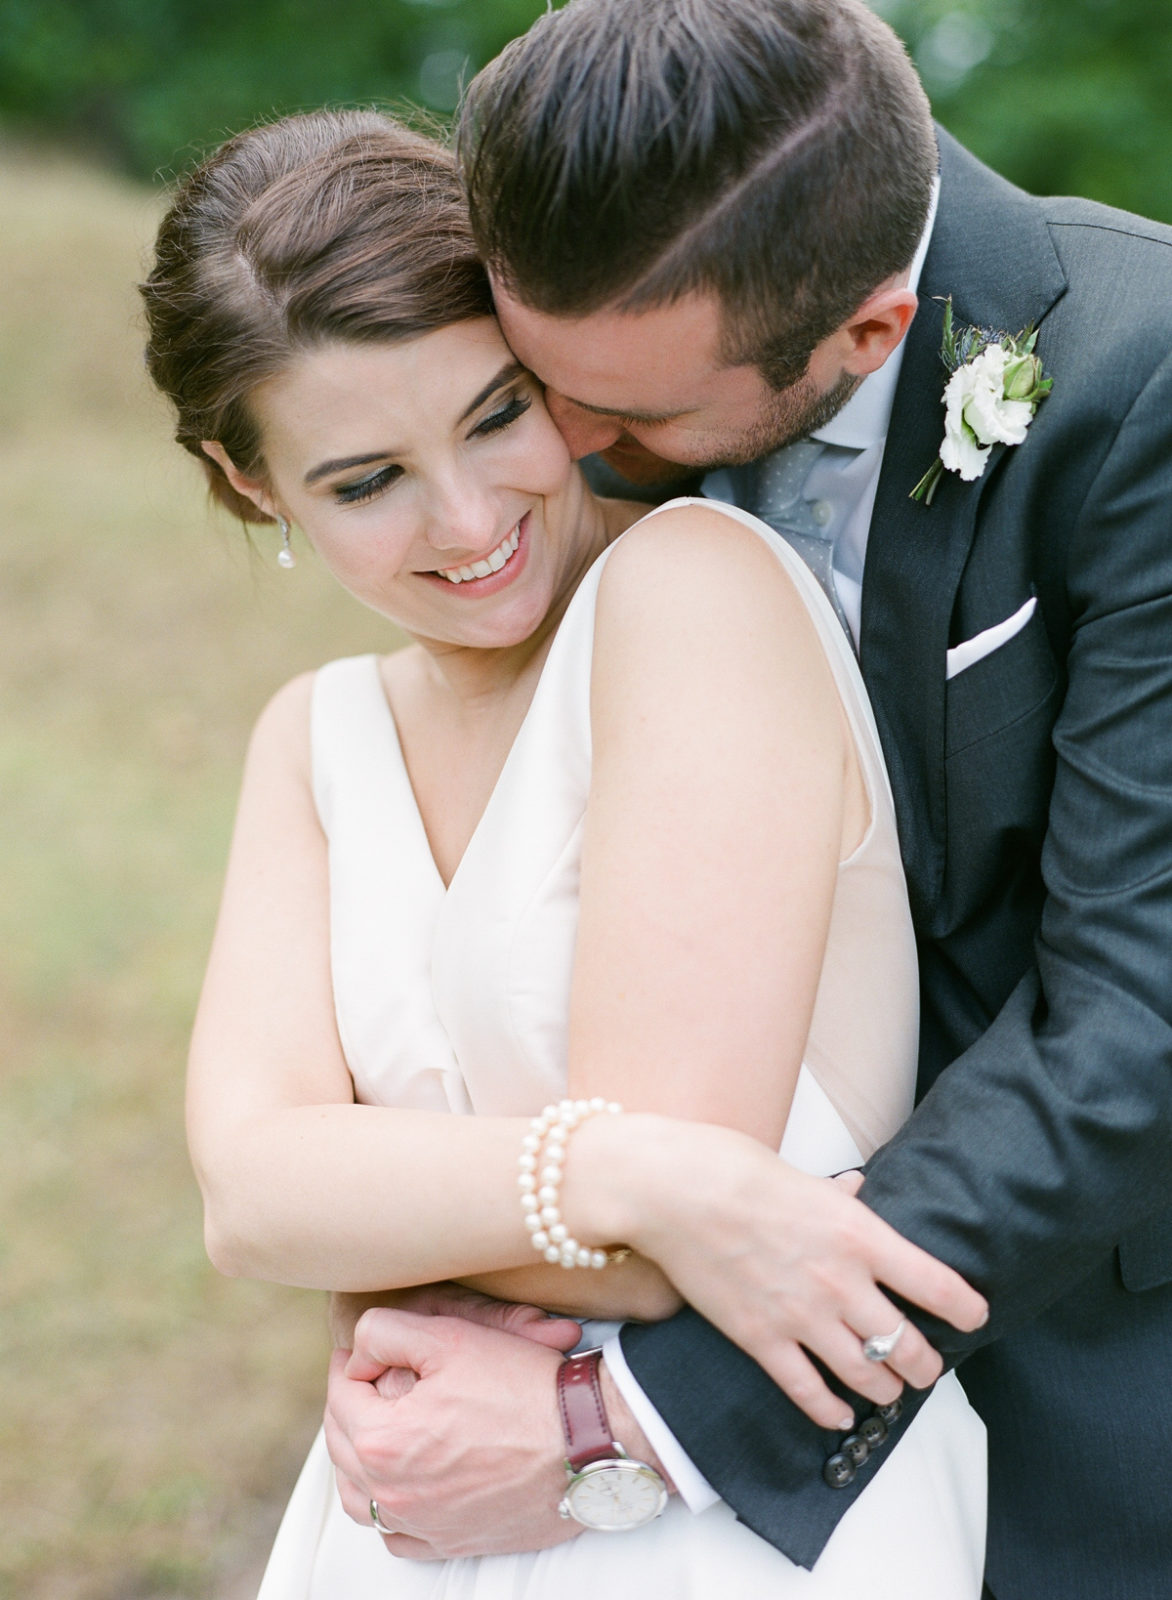 Ireland Film Photographer | Molly Carr Photography | Bride in White Jenny Yoo Dress and Groom in Grey Suit Kissing